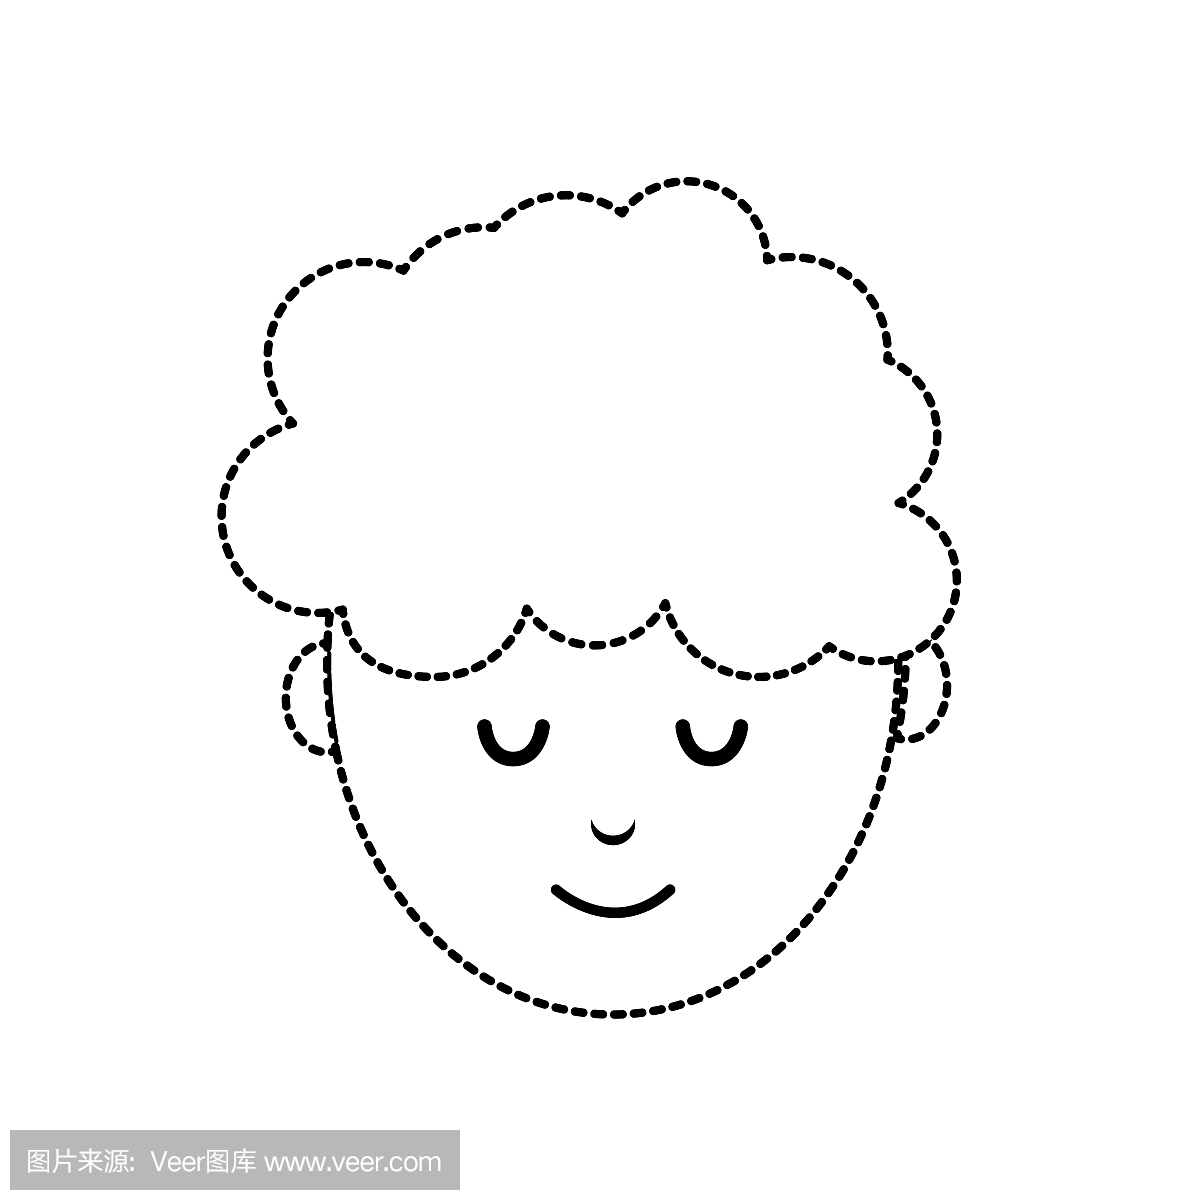 dotted shape avatar man head with hairstyle de